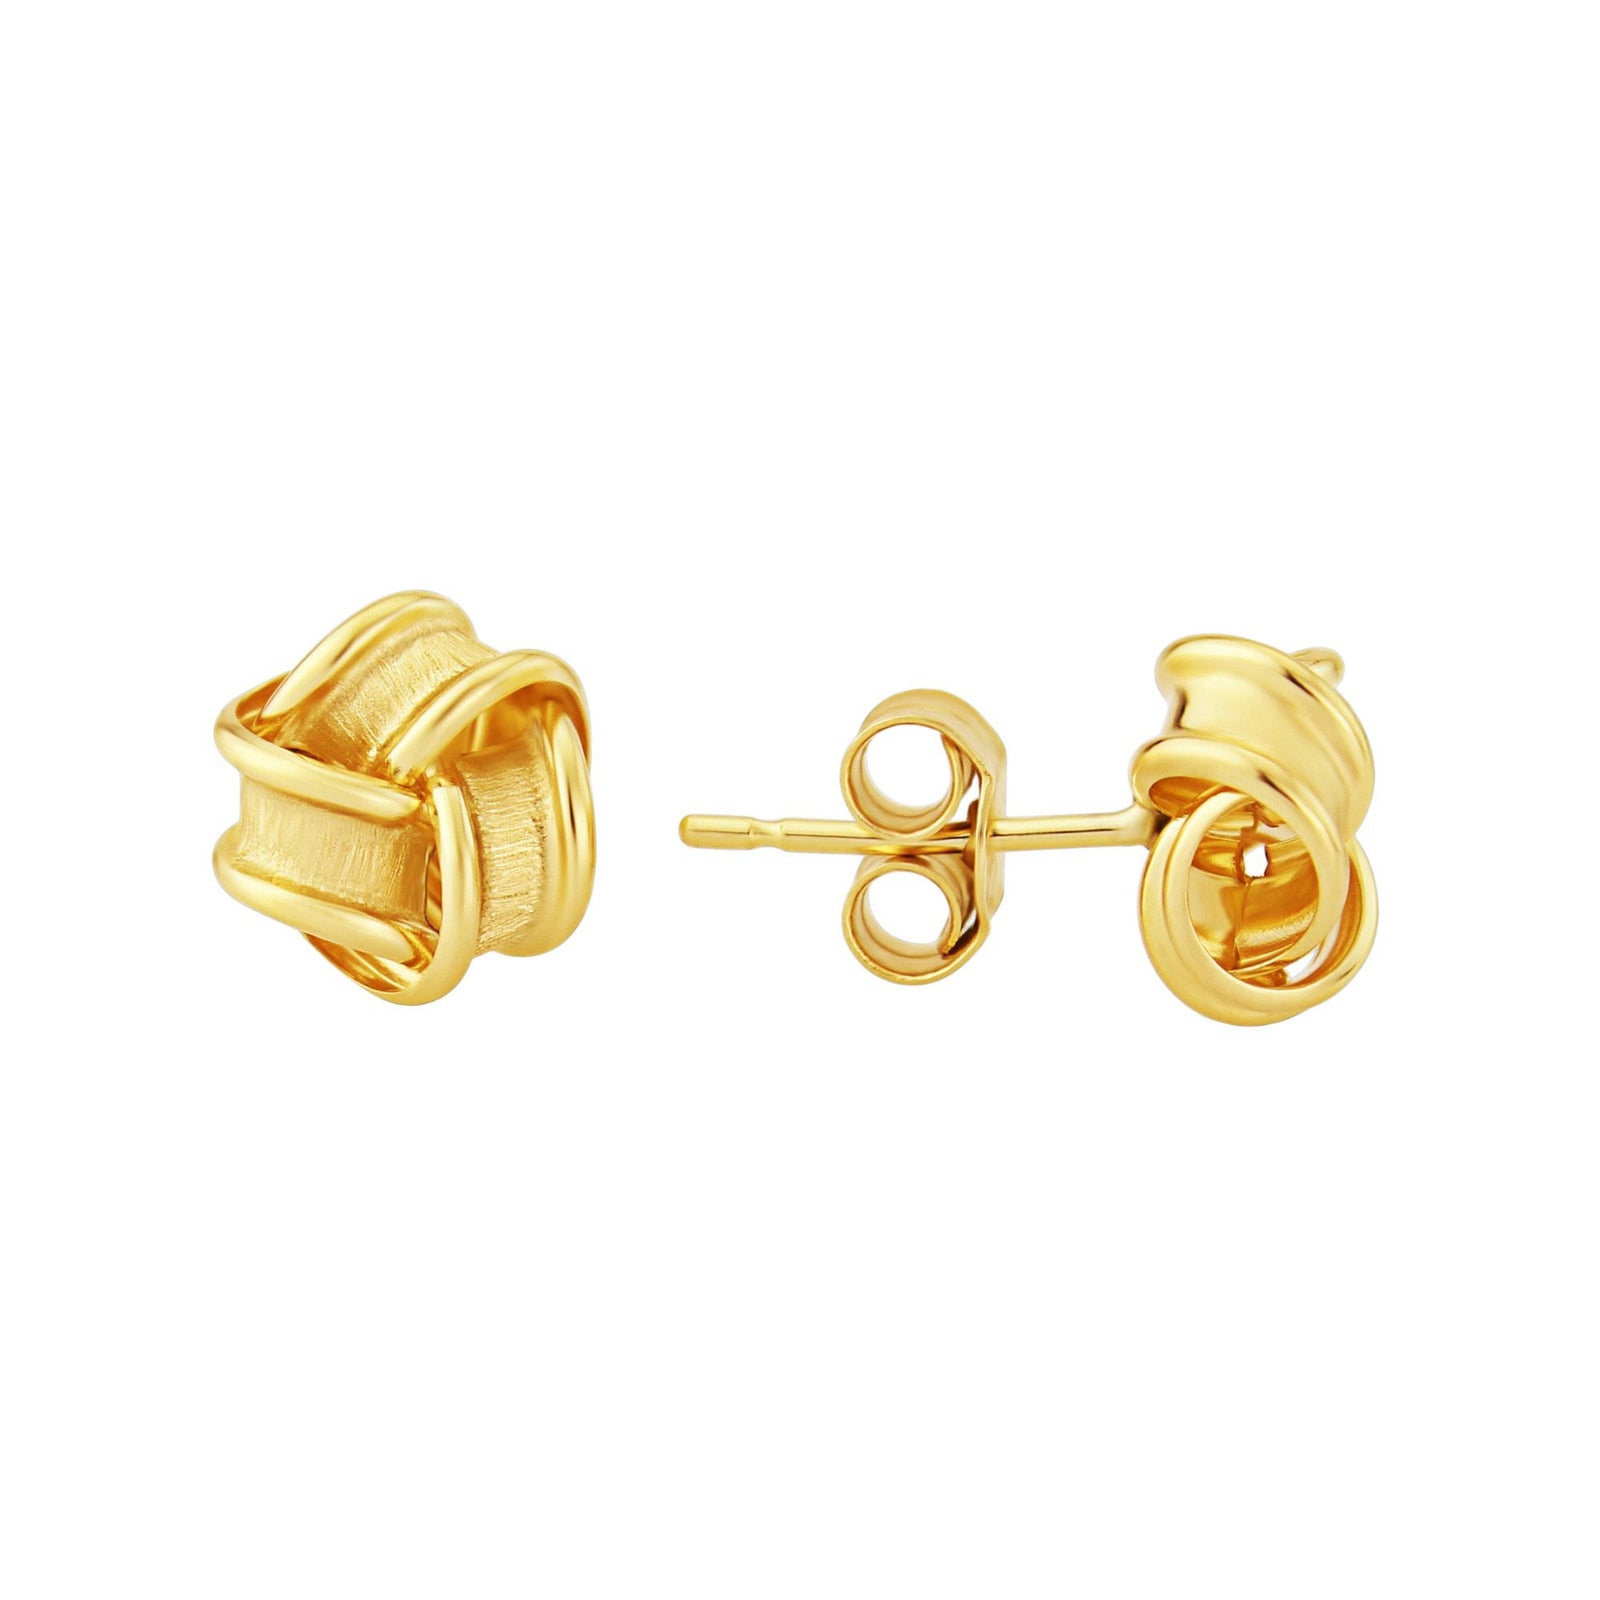 9ct gold frosted knot stud earrings